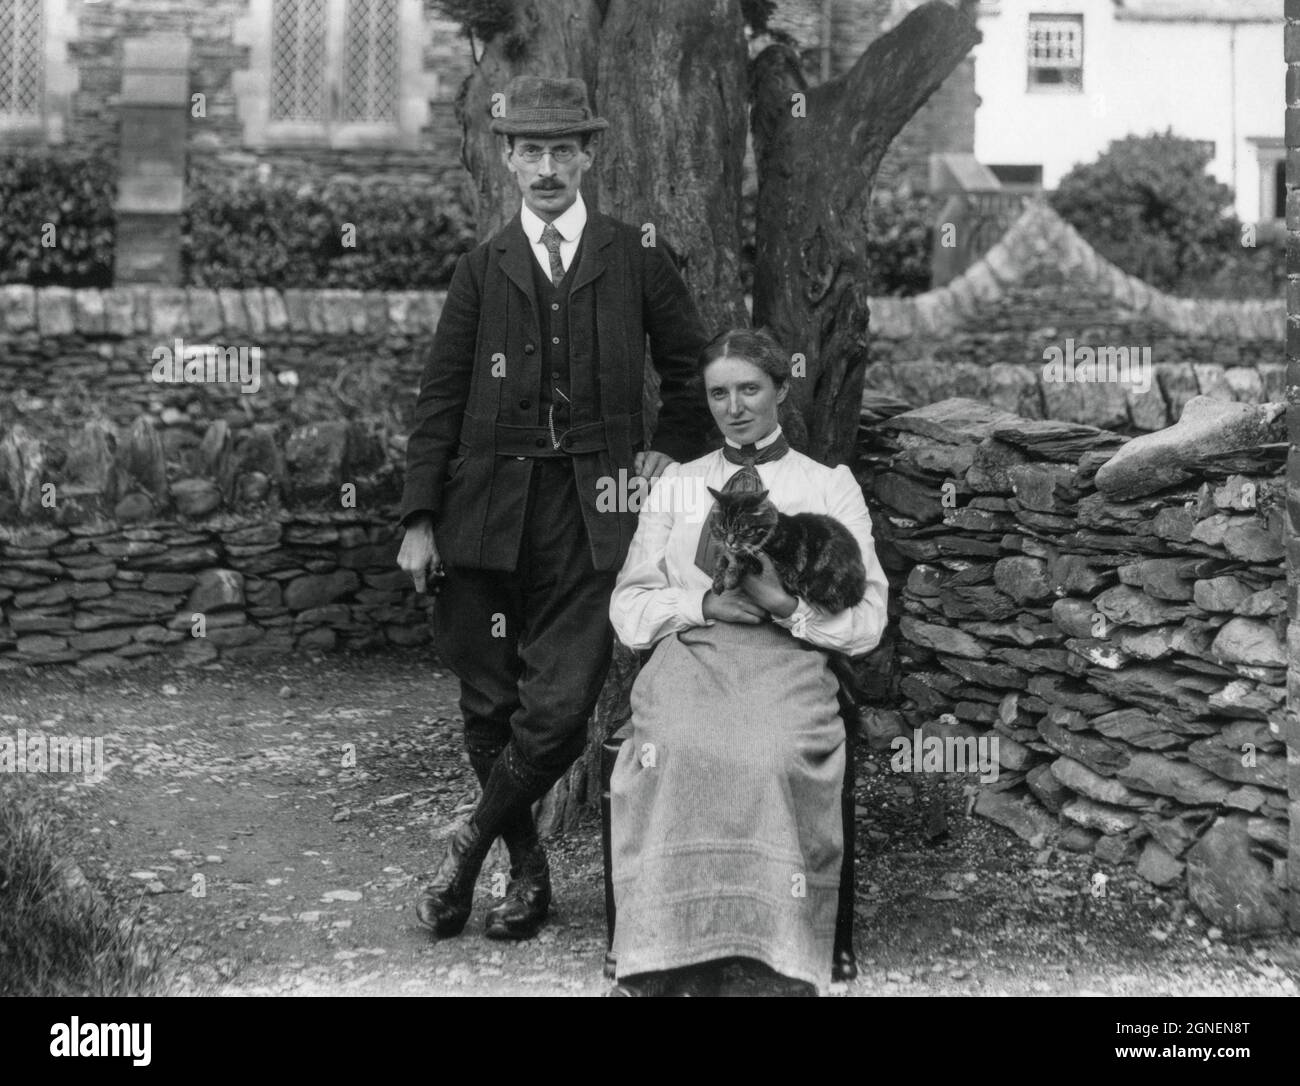 Professional artists of the late 1800s and early 1900s, William Smallwood Winder (1869 - 1910) and May Chatteris Winder née Fisher (1874 - 1910), in Staveley, near Kendal, Cumbria (formerly Westmorland), England, on the edge of the English Lake District.  Both William and May were founder members of the English Lake Artists’ Society, established in 1904. Stock Photo